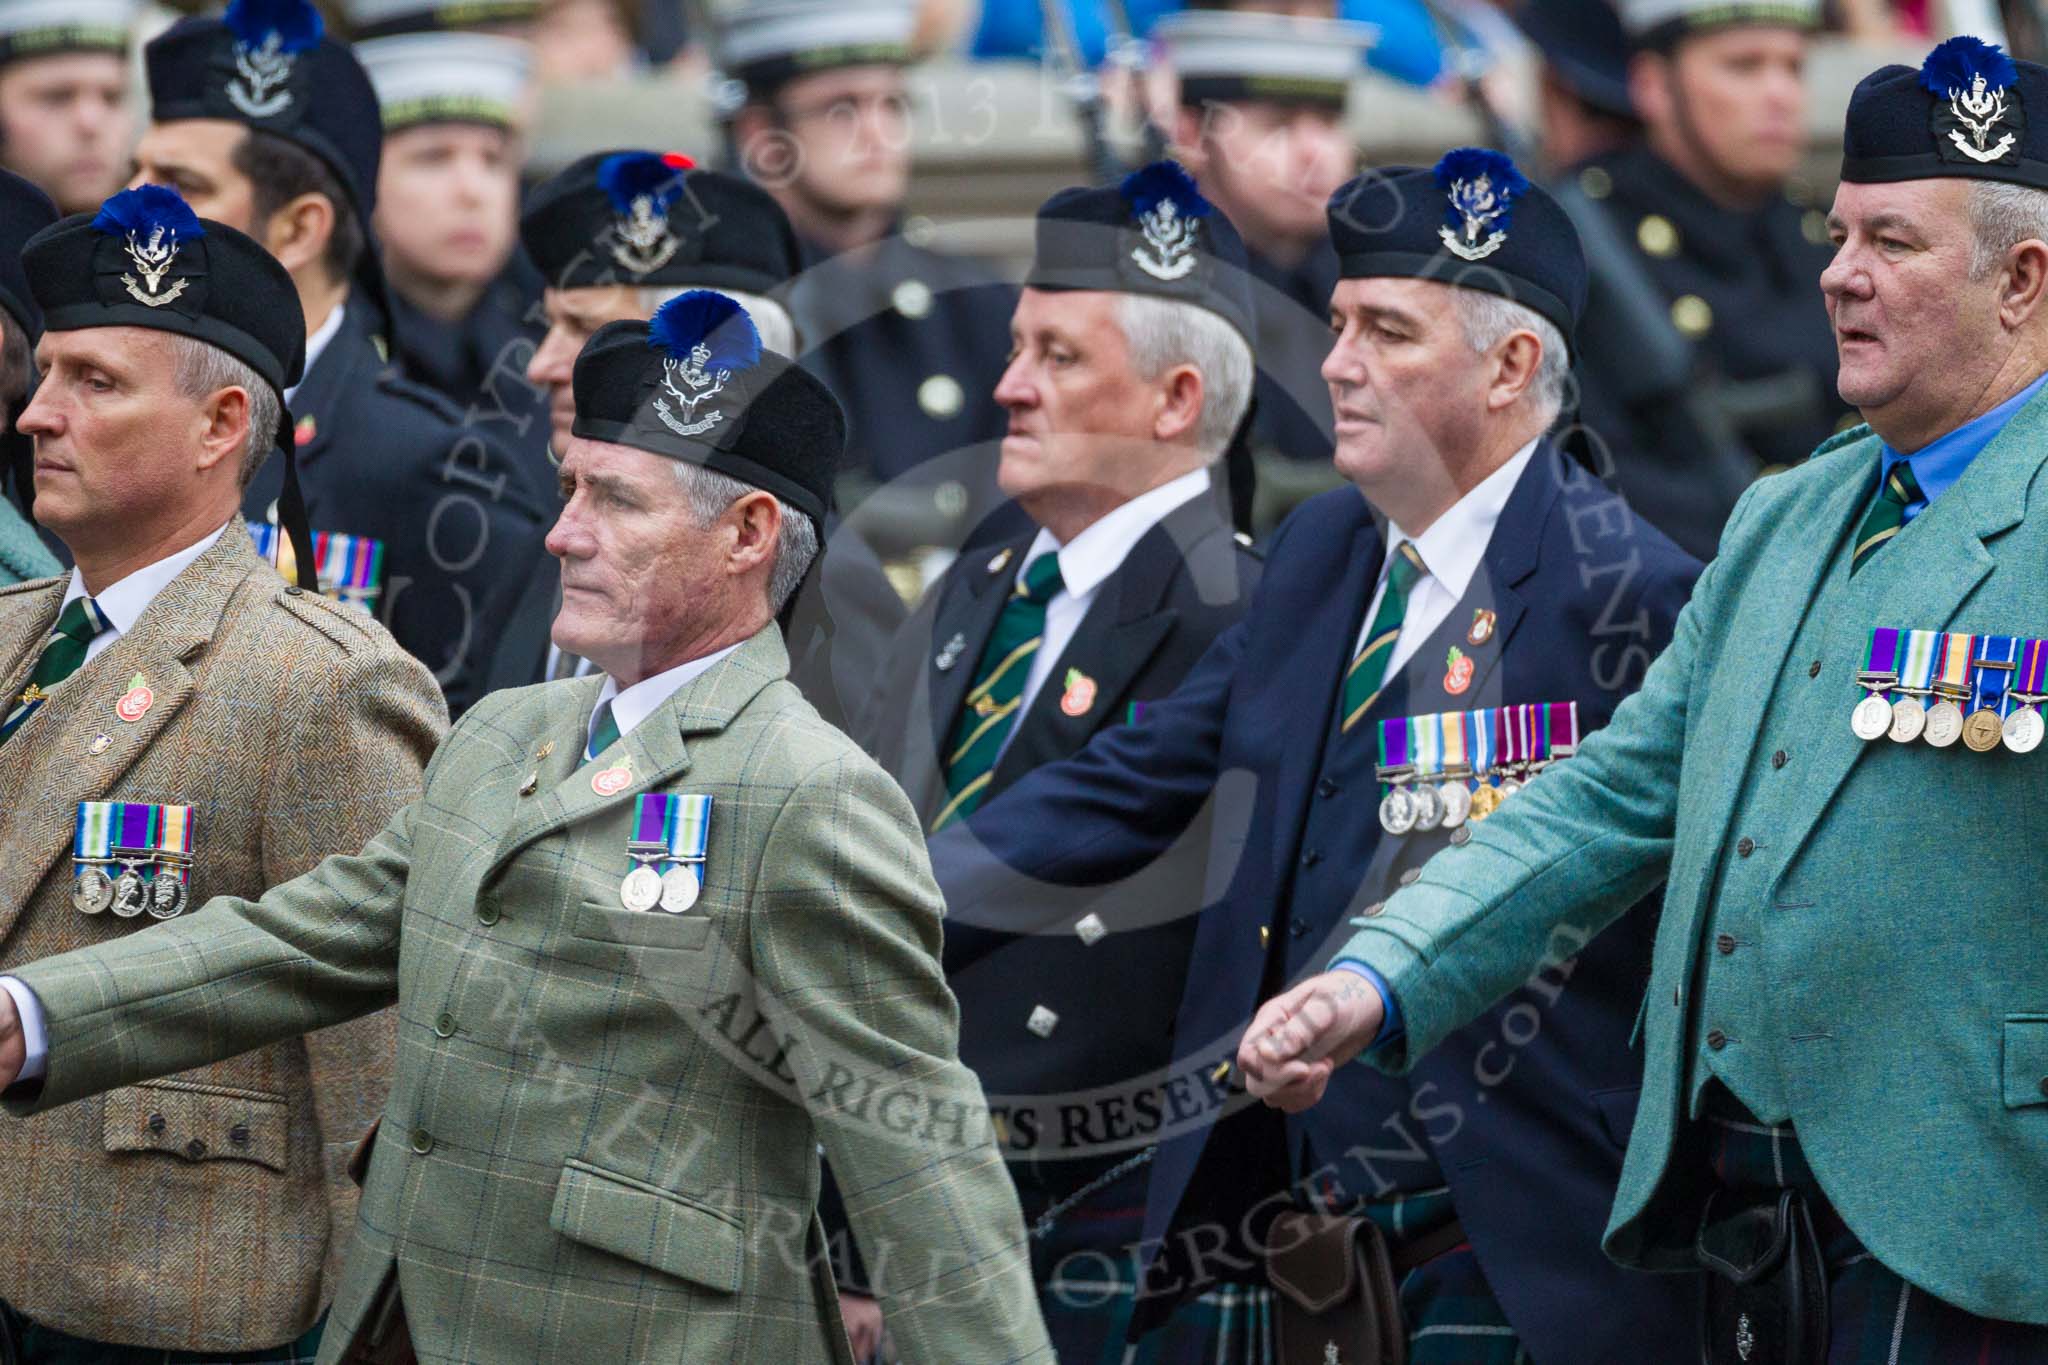 Remembrance Sunday at the Cenotaph 2015: Group A8, Queen's Own Highlanders Regimental Association.
Cenotaph, Whitehall, London SW1,
London,
Greater London,
United Kingdom,
on 08 November 2015 at 12:10, image #1242